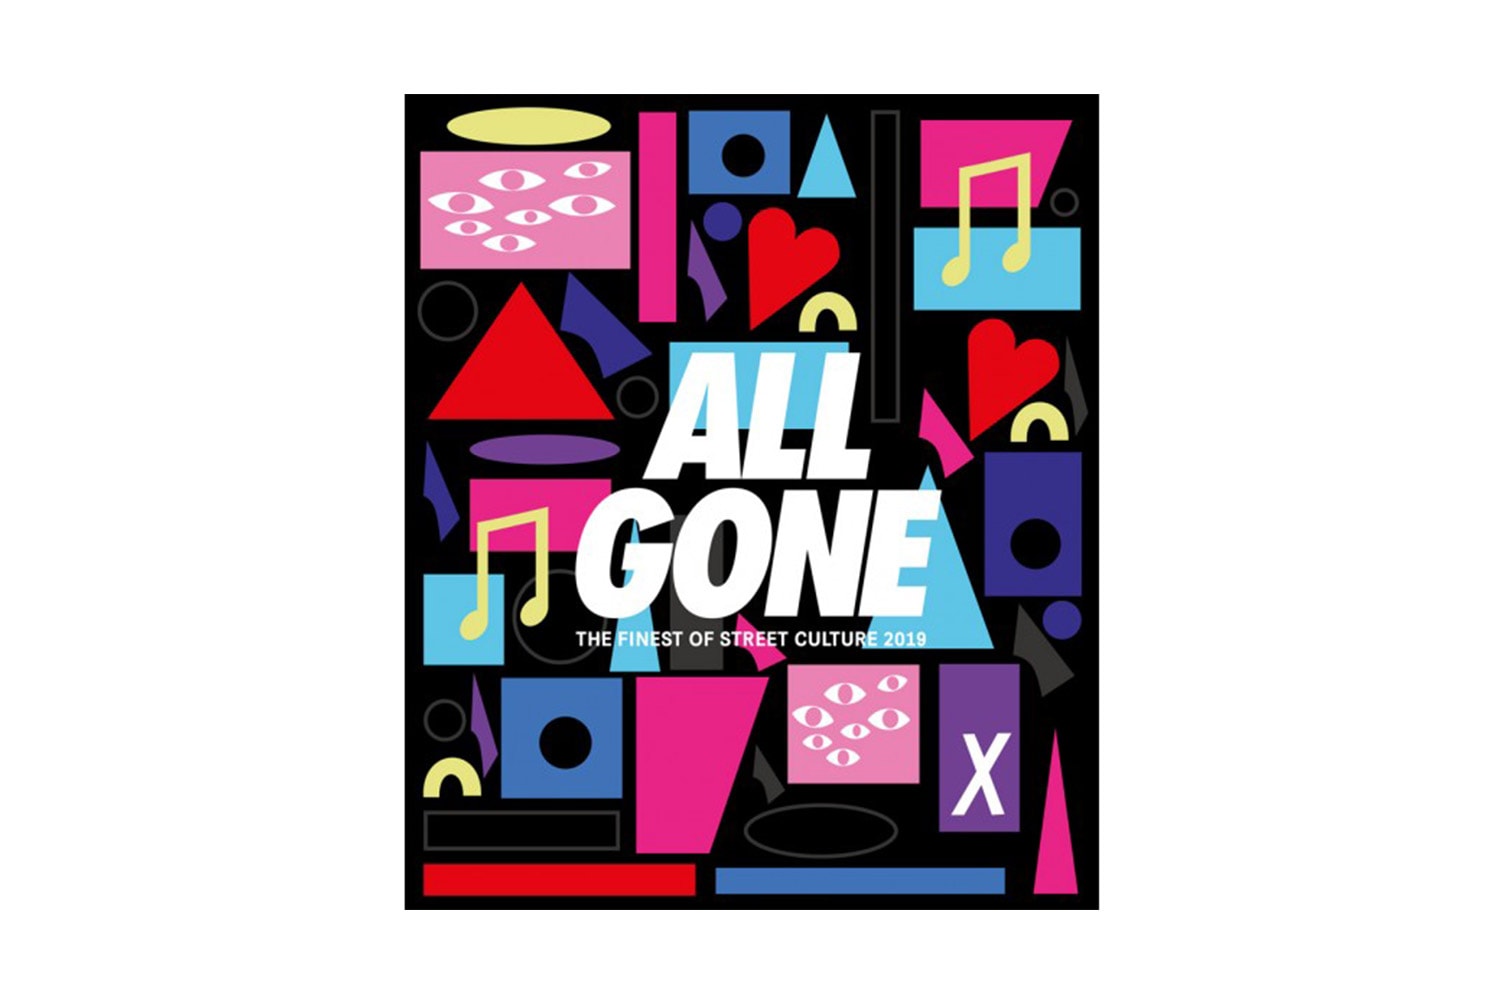 All Gone 2019 I Want Your Love Ode to Street Culture Book chic La MJC Michael Dupouy Nina Chanel Abney Nike adidas Supreme Yeezy Off White Jordan Brand